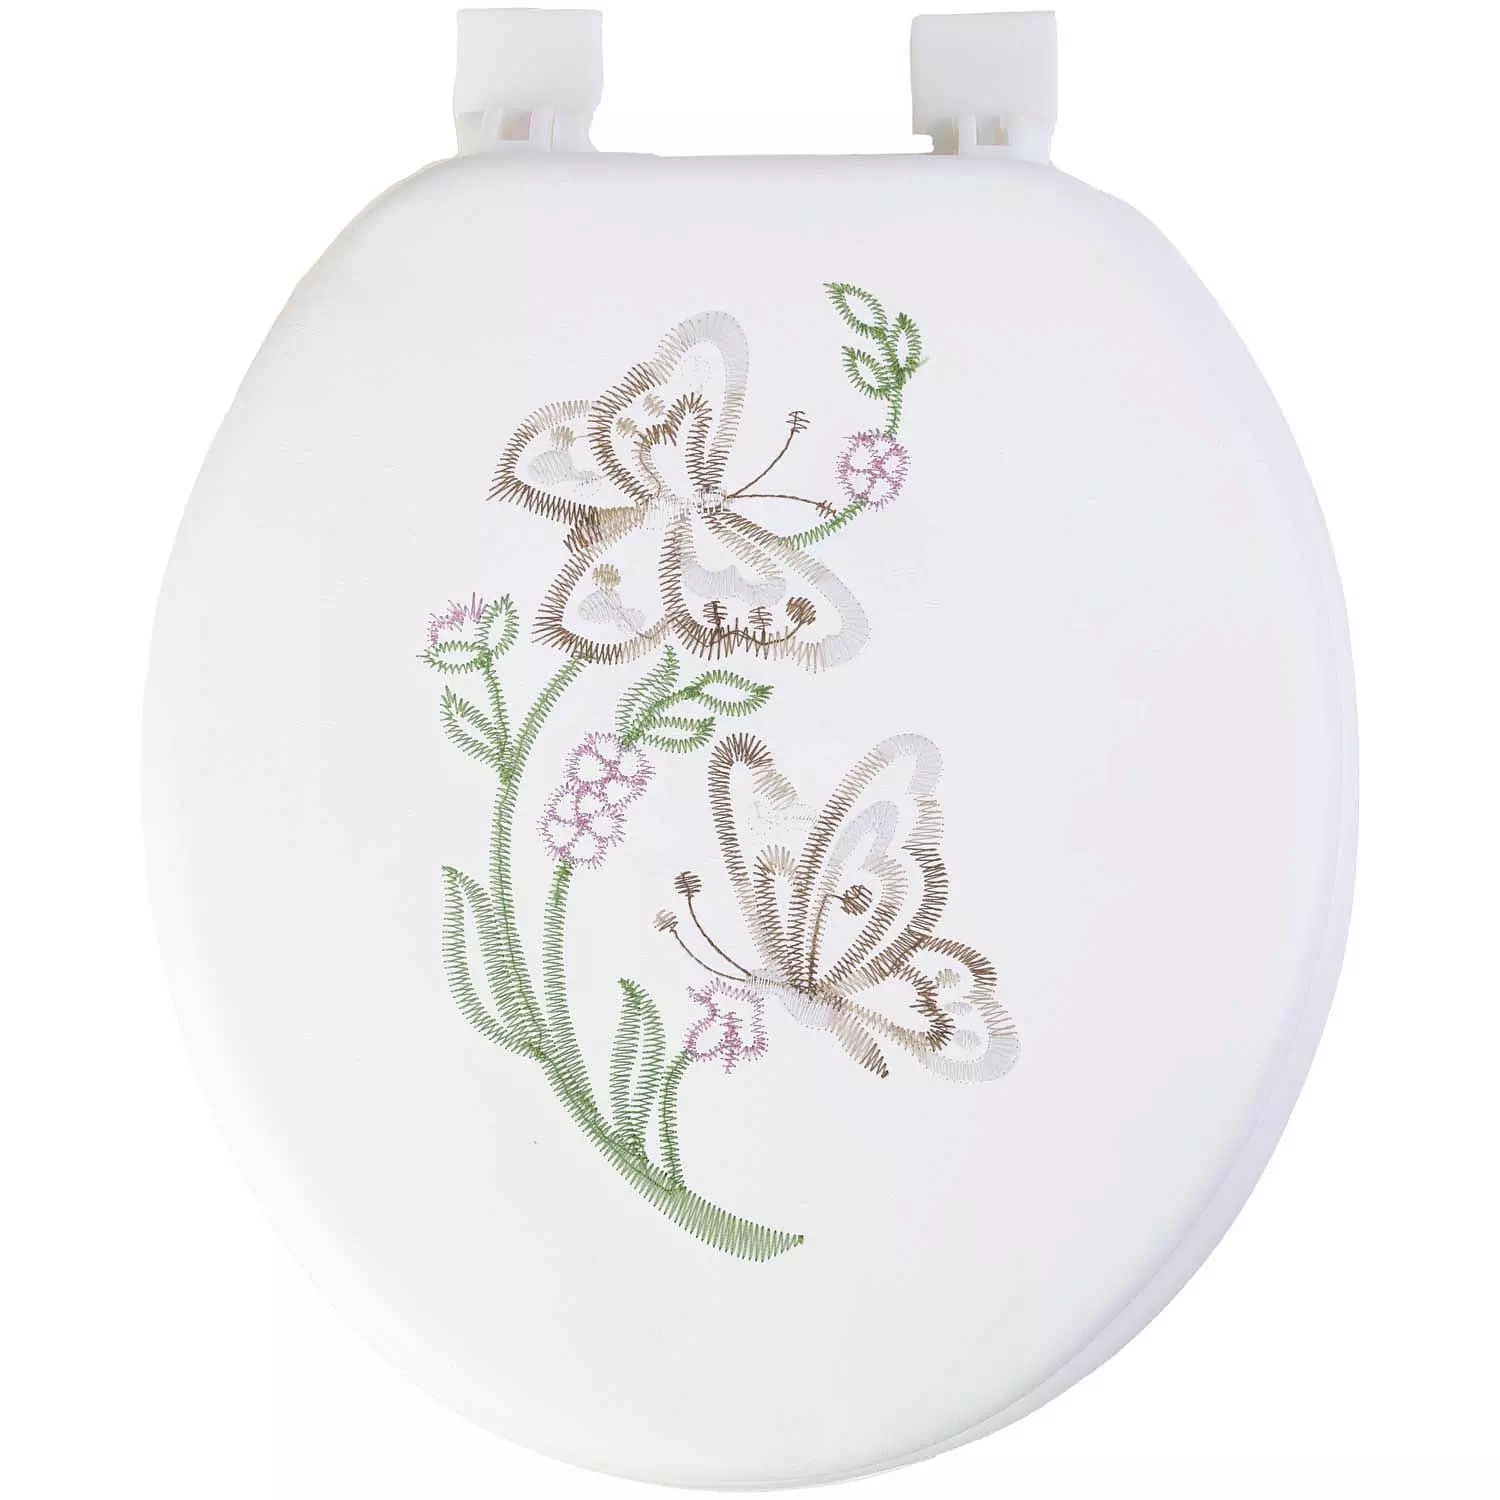 Cushioned toilet seat, butterflies embroidery